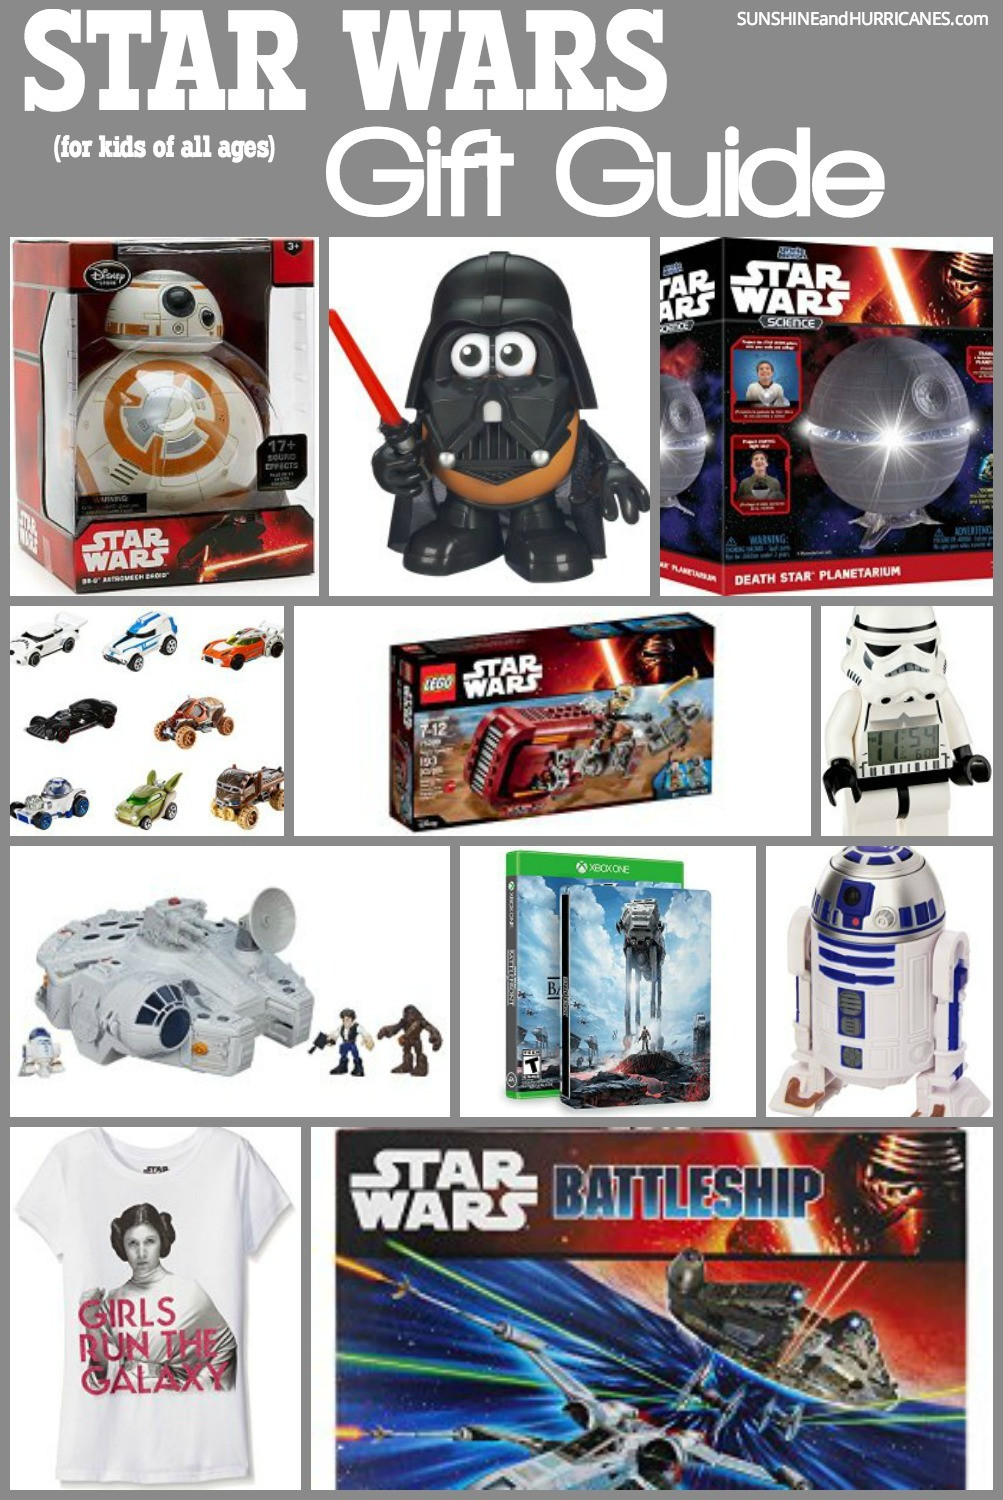 Best Star Wars Gifts For Kids
 Star Wars Gift Guide For Jedis of all Ages